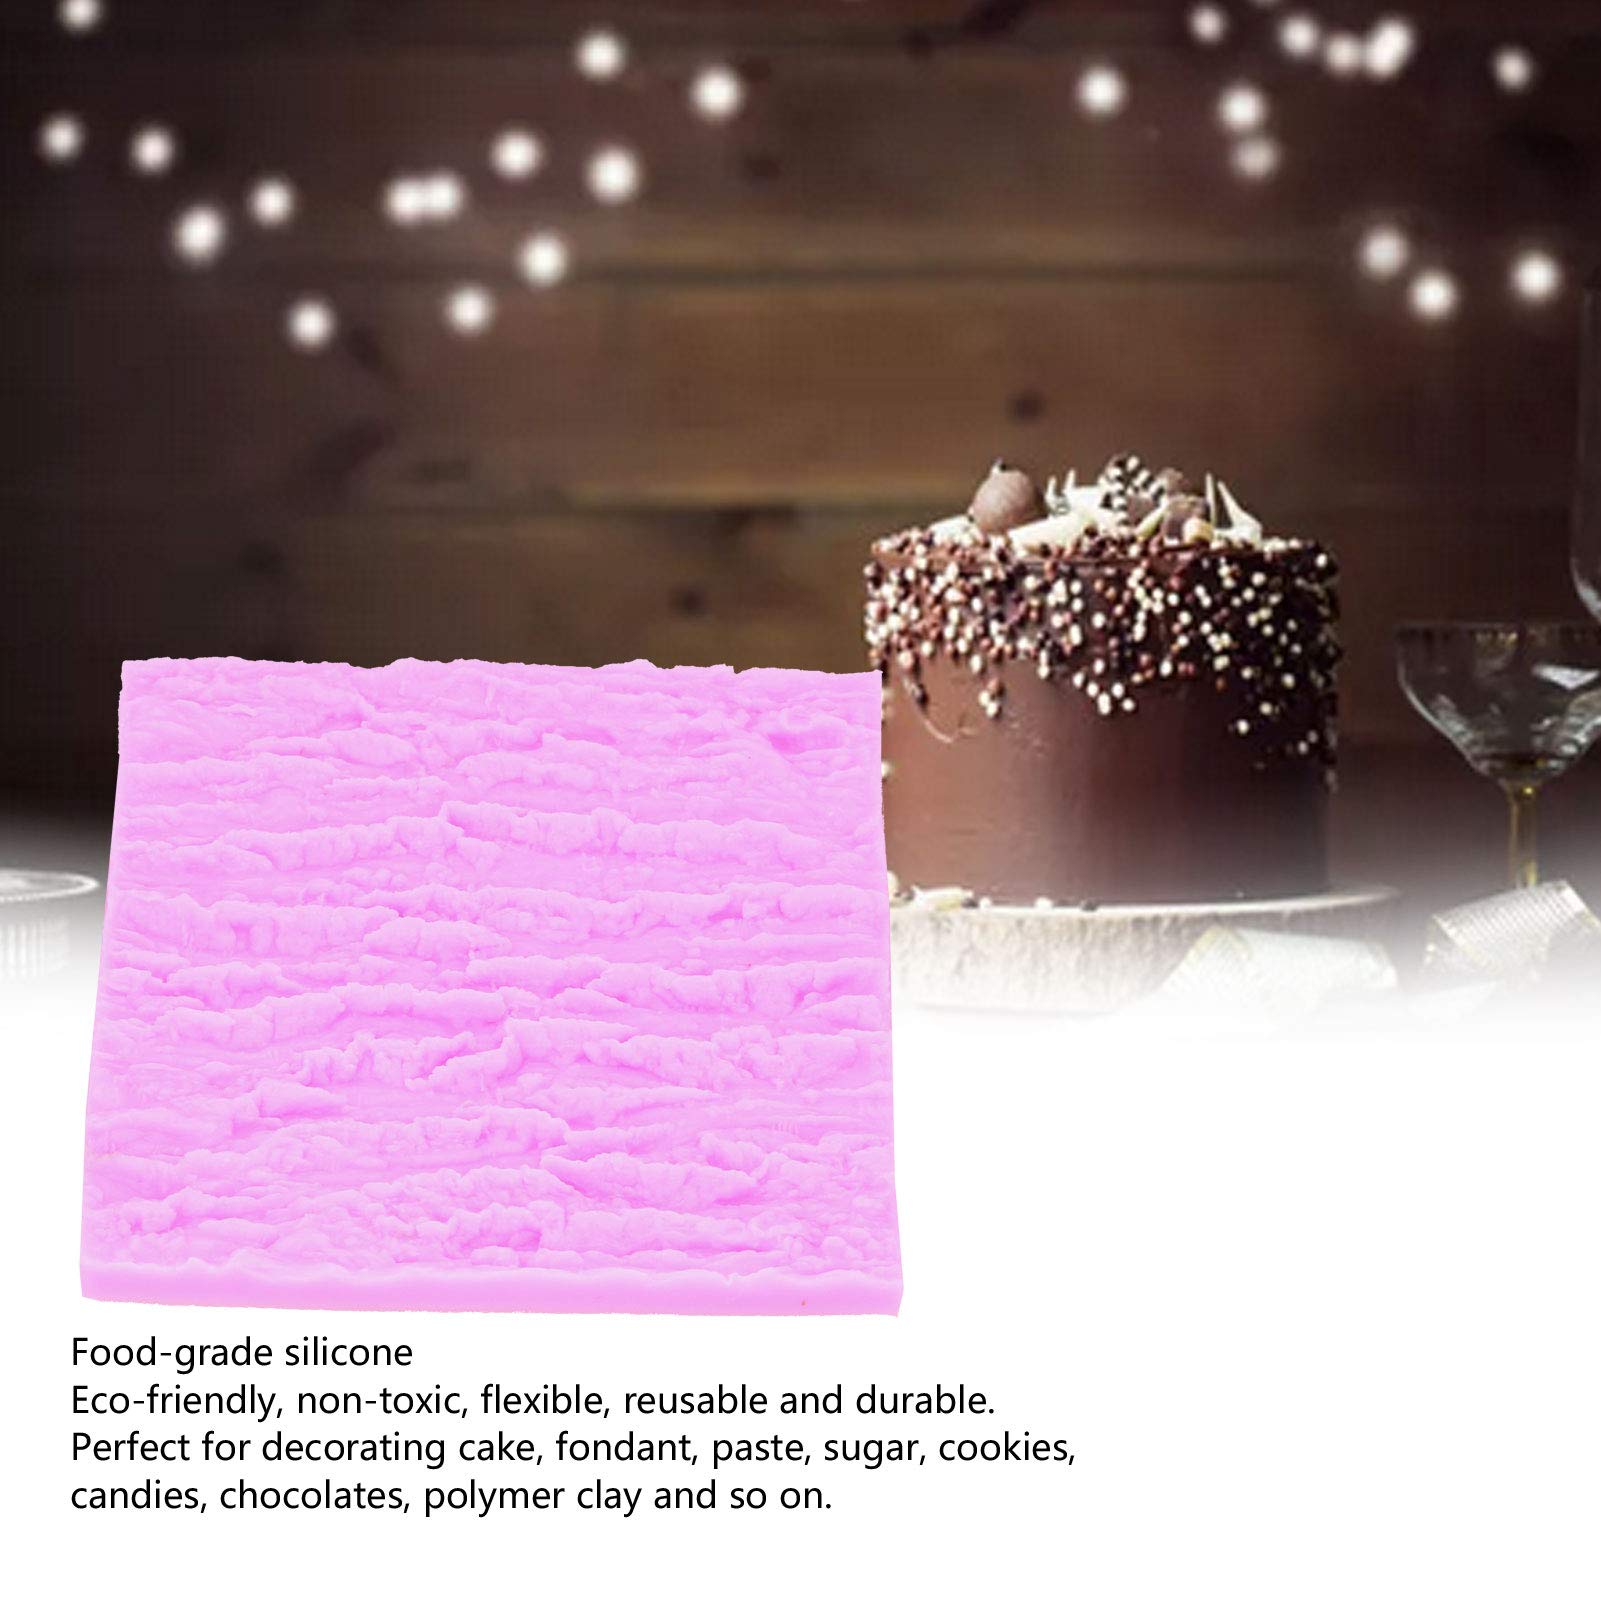 Tree Bark Texture Silicone Mould Cake Fondant Lace Mould Imprint Mat Decorating Supplies for Cakes Fudge Biscuits Candies Chocolate (7.2x6.0x0.4in Pink)(pink)